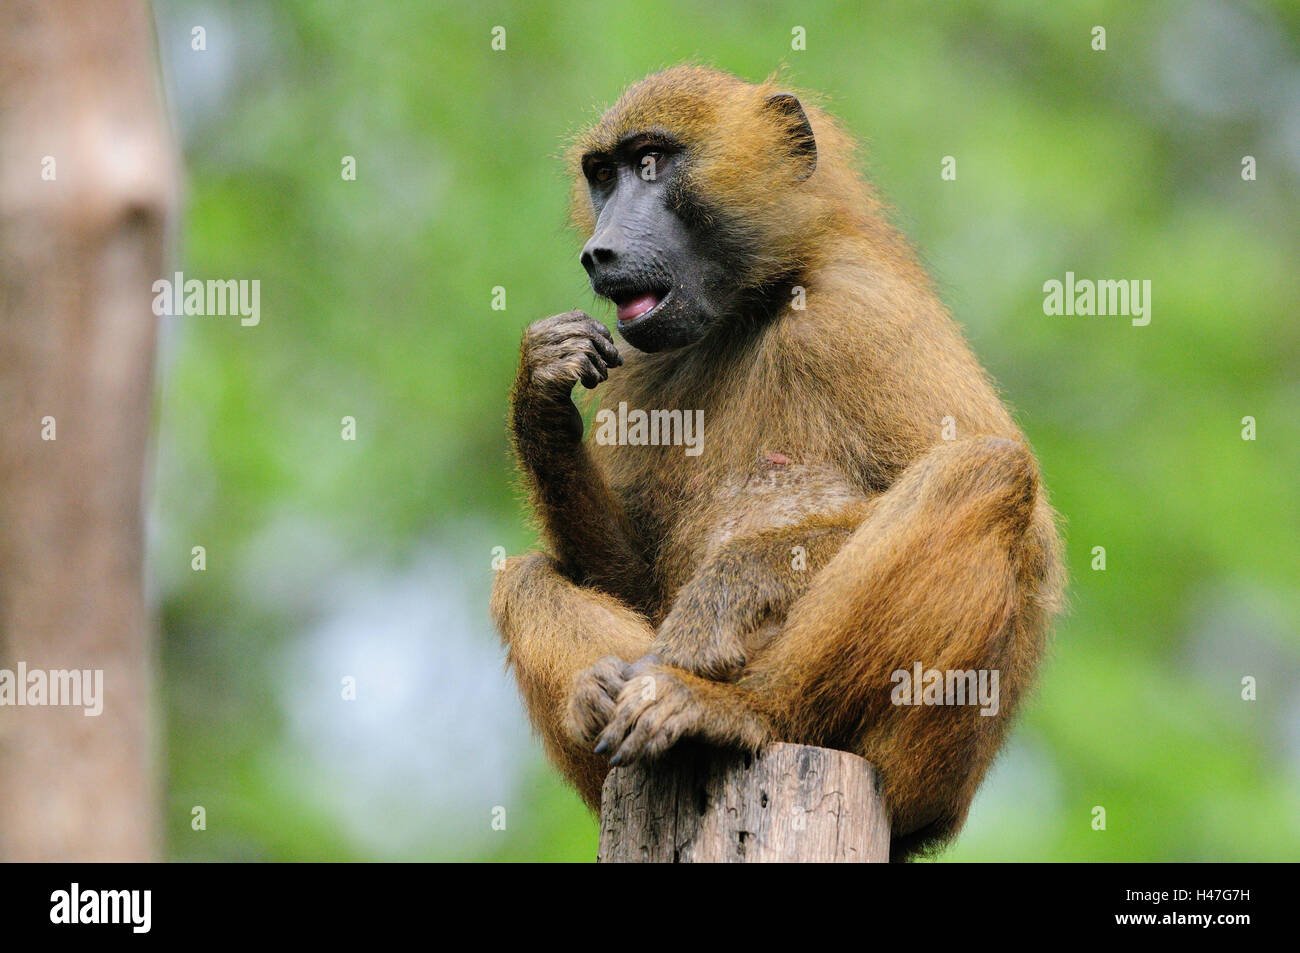 Guinea baboon, Papio papio, half portrait, front view, sitting, lifting, hand, focus on the foreground, Stock Photo